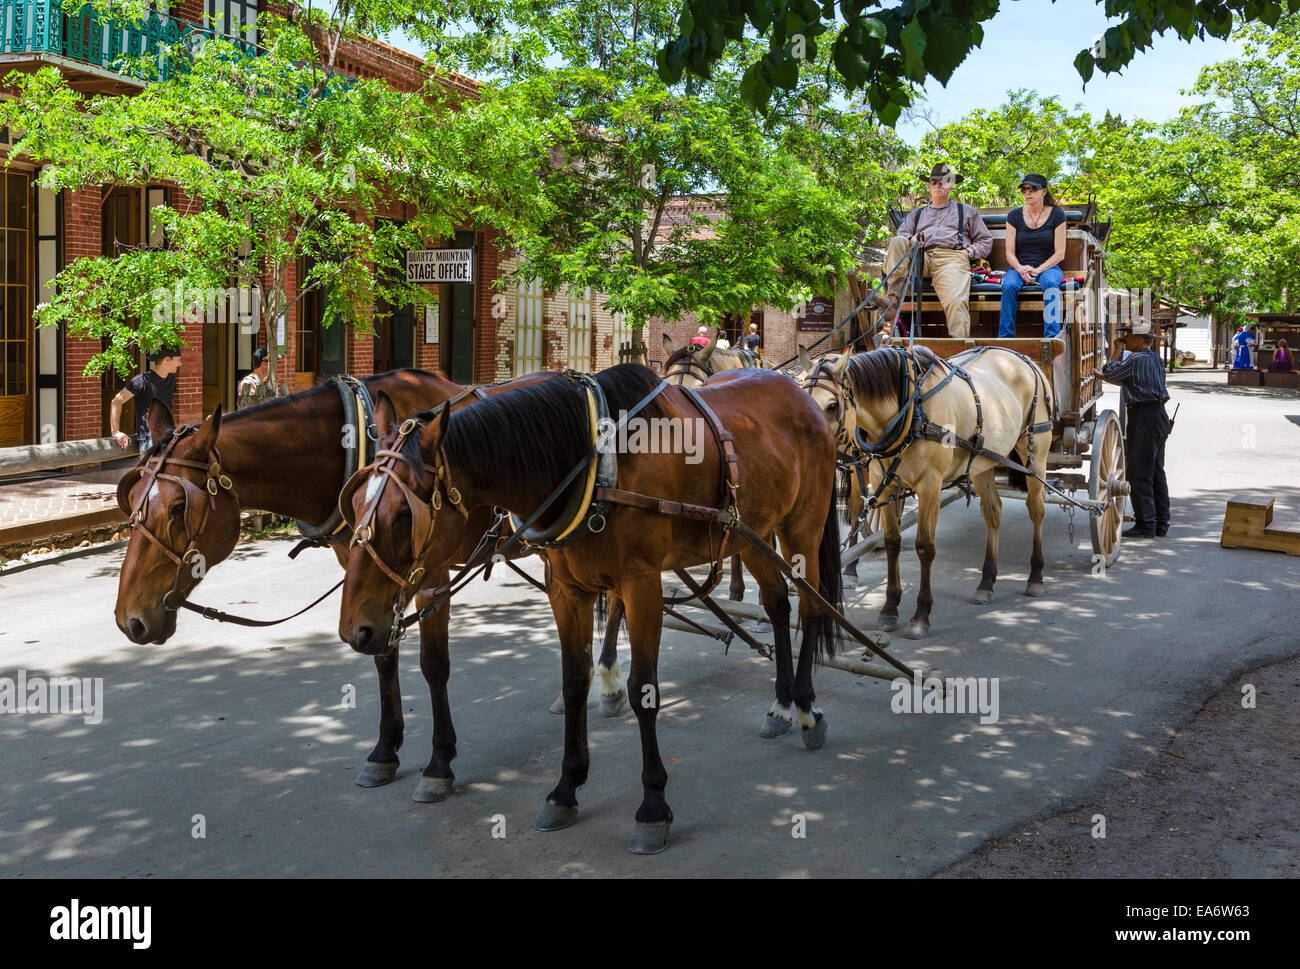 Stagecoach on Main Street in old gold mining town of Columbia, Columbia State Historic Park, Tuolumne County, California, USA Stock Photo